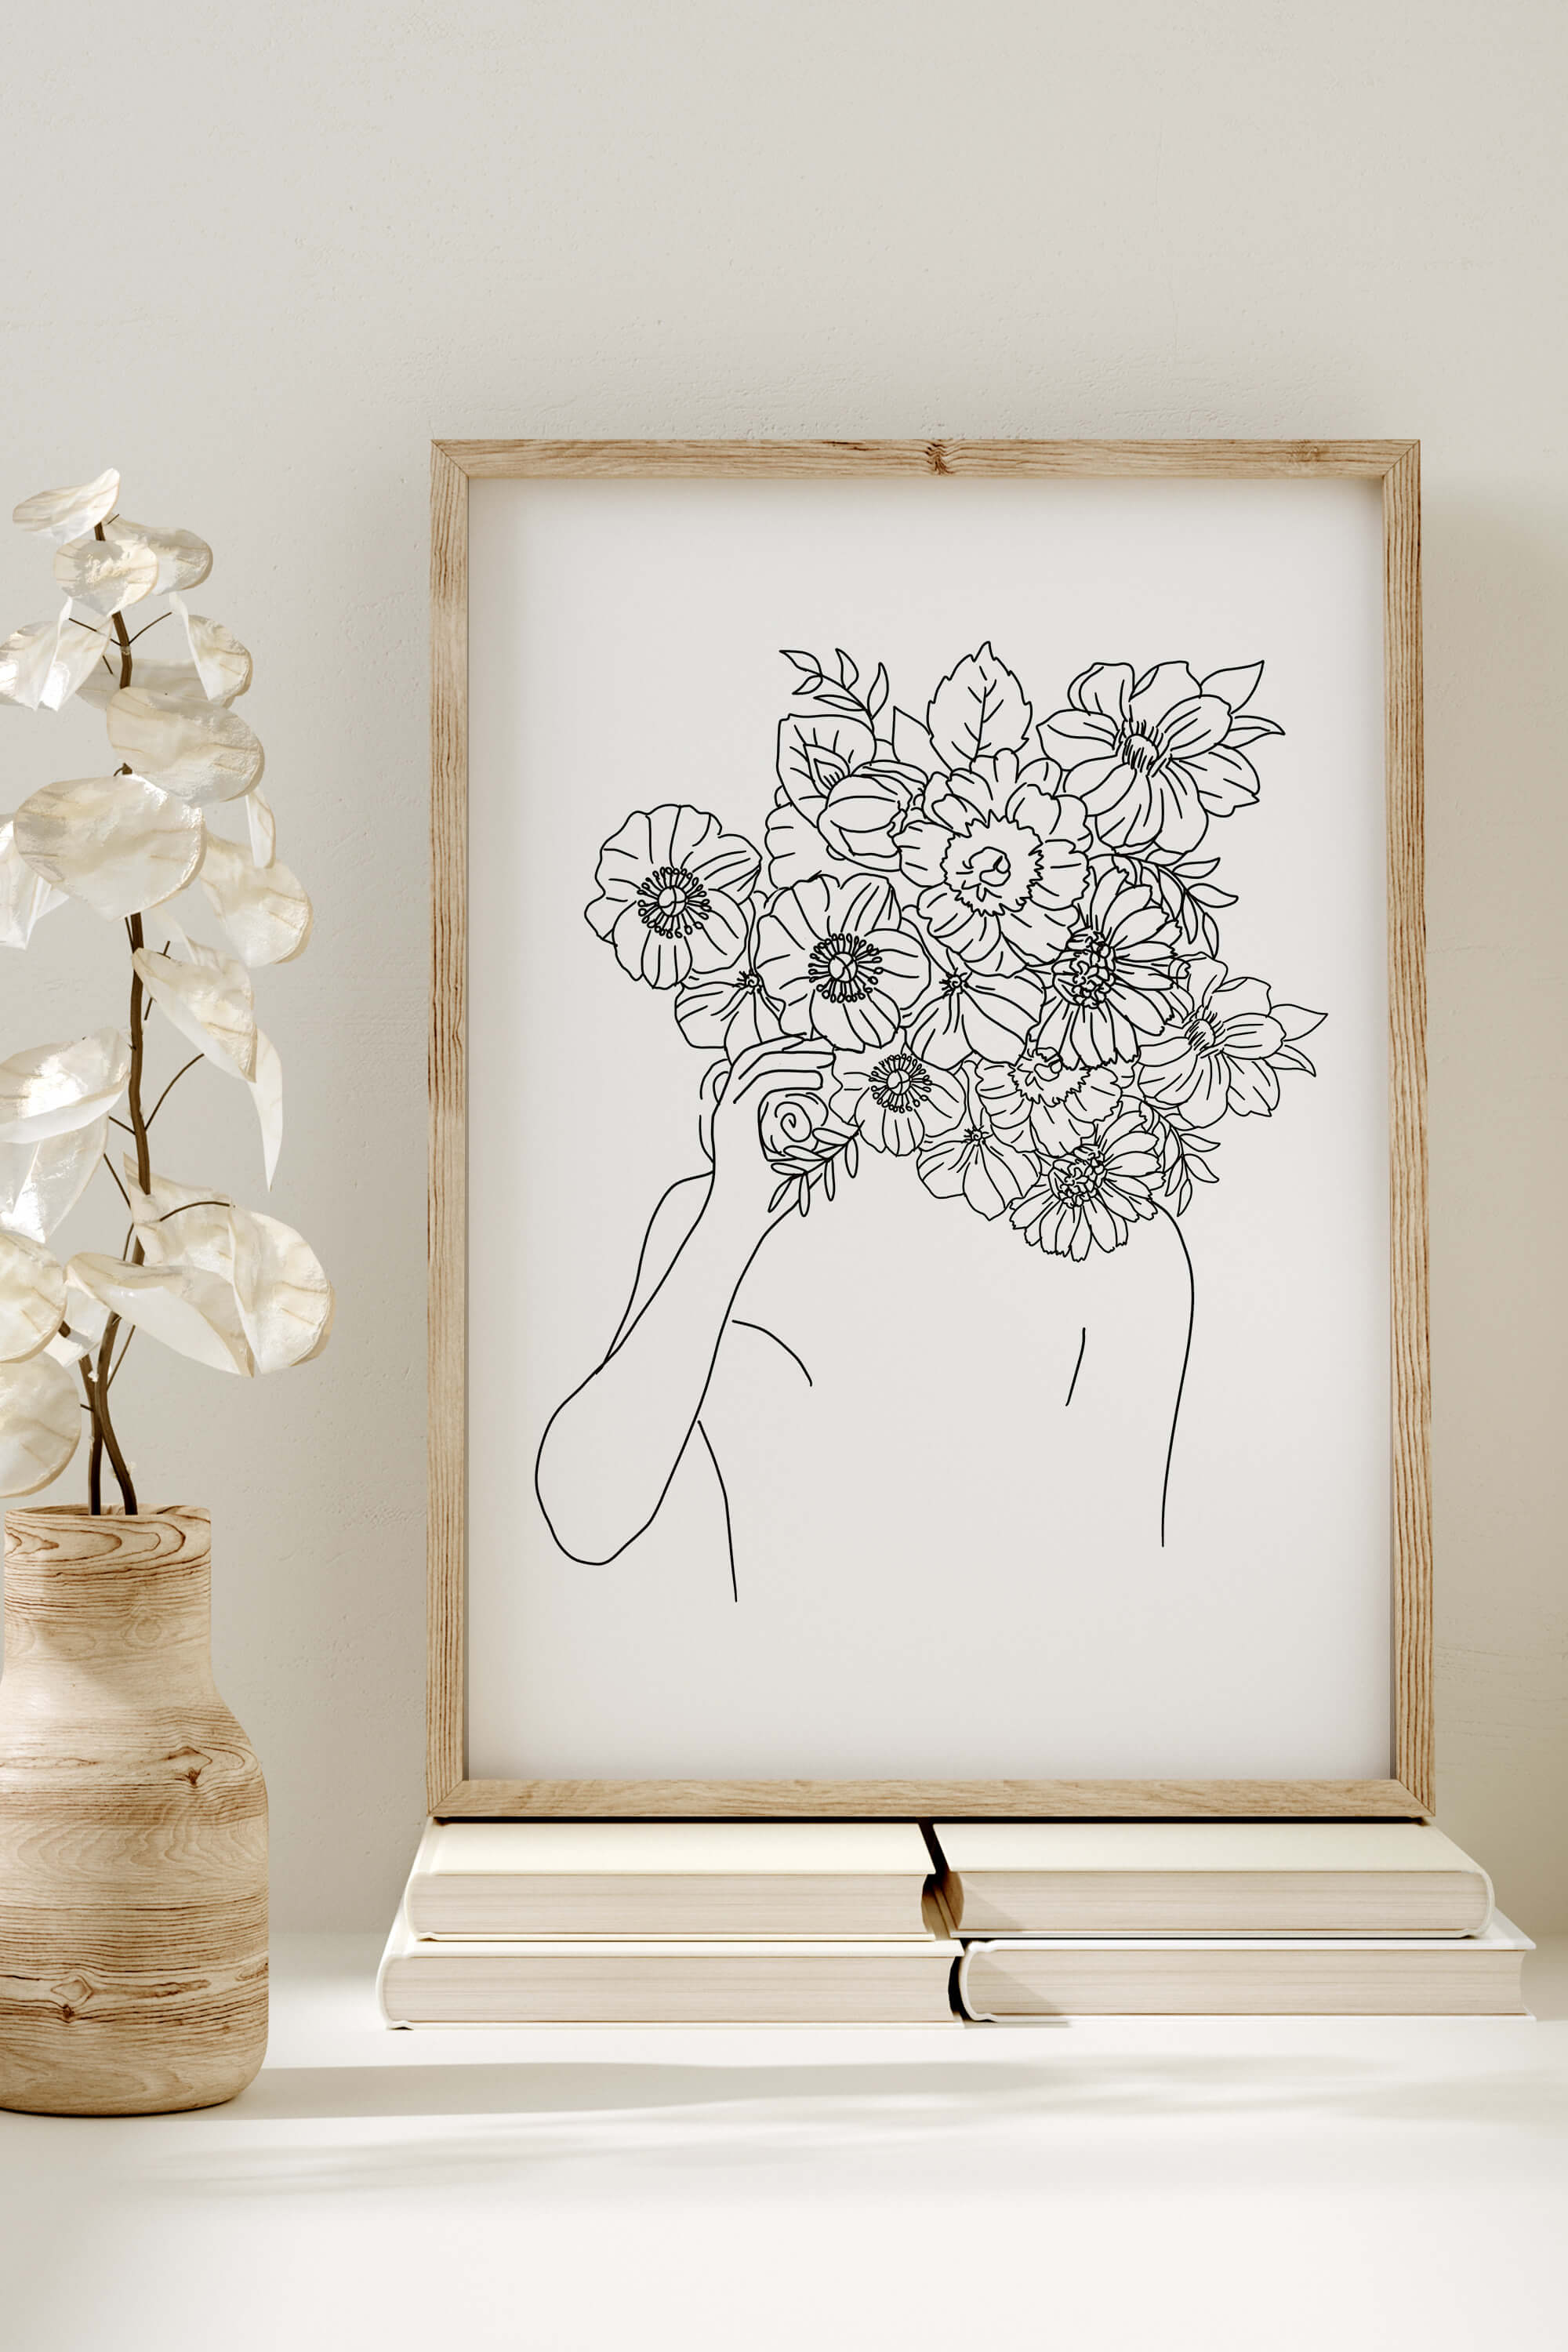 An elegant line art print showcasing the delicate beauty of a woman with a flower head – a monochrome masterpiece that merges sophistication with botanical charm.